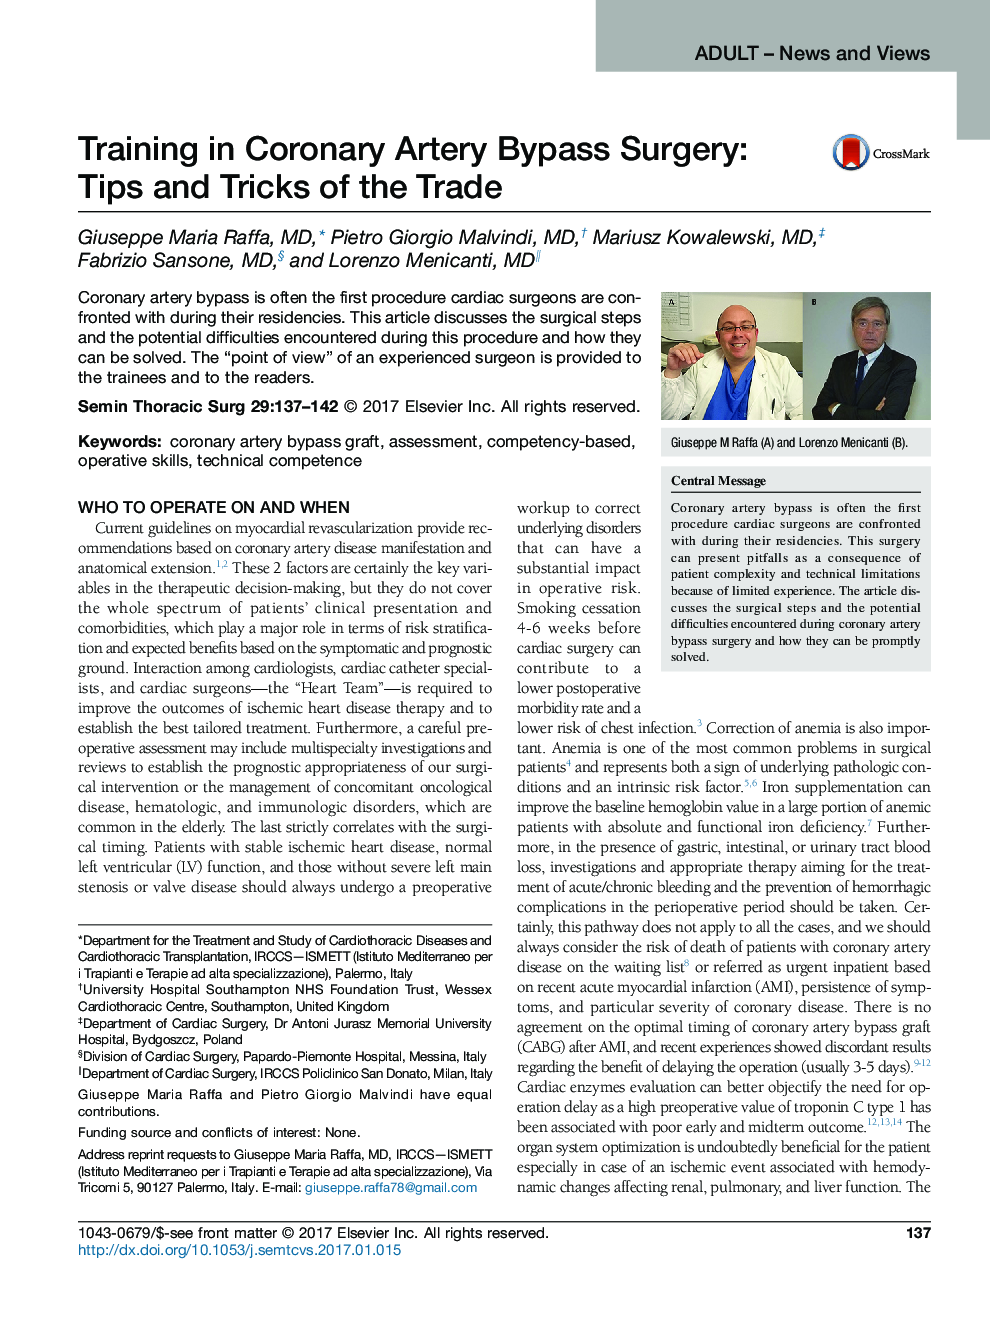 Adult - News and ViewsTraining in Coronary Artery Bypass Surgery: Tips and Tricks of the Trade